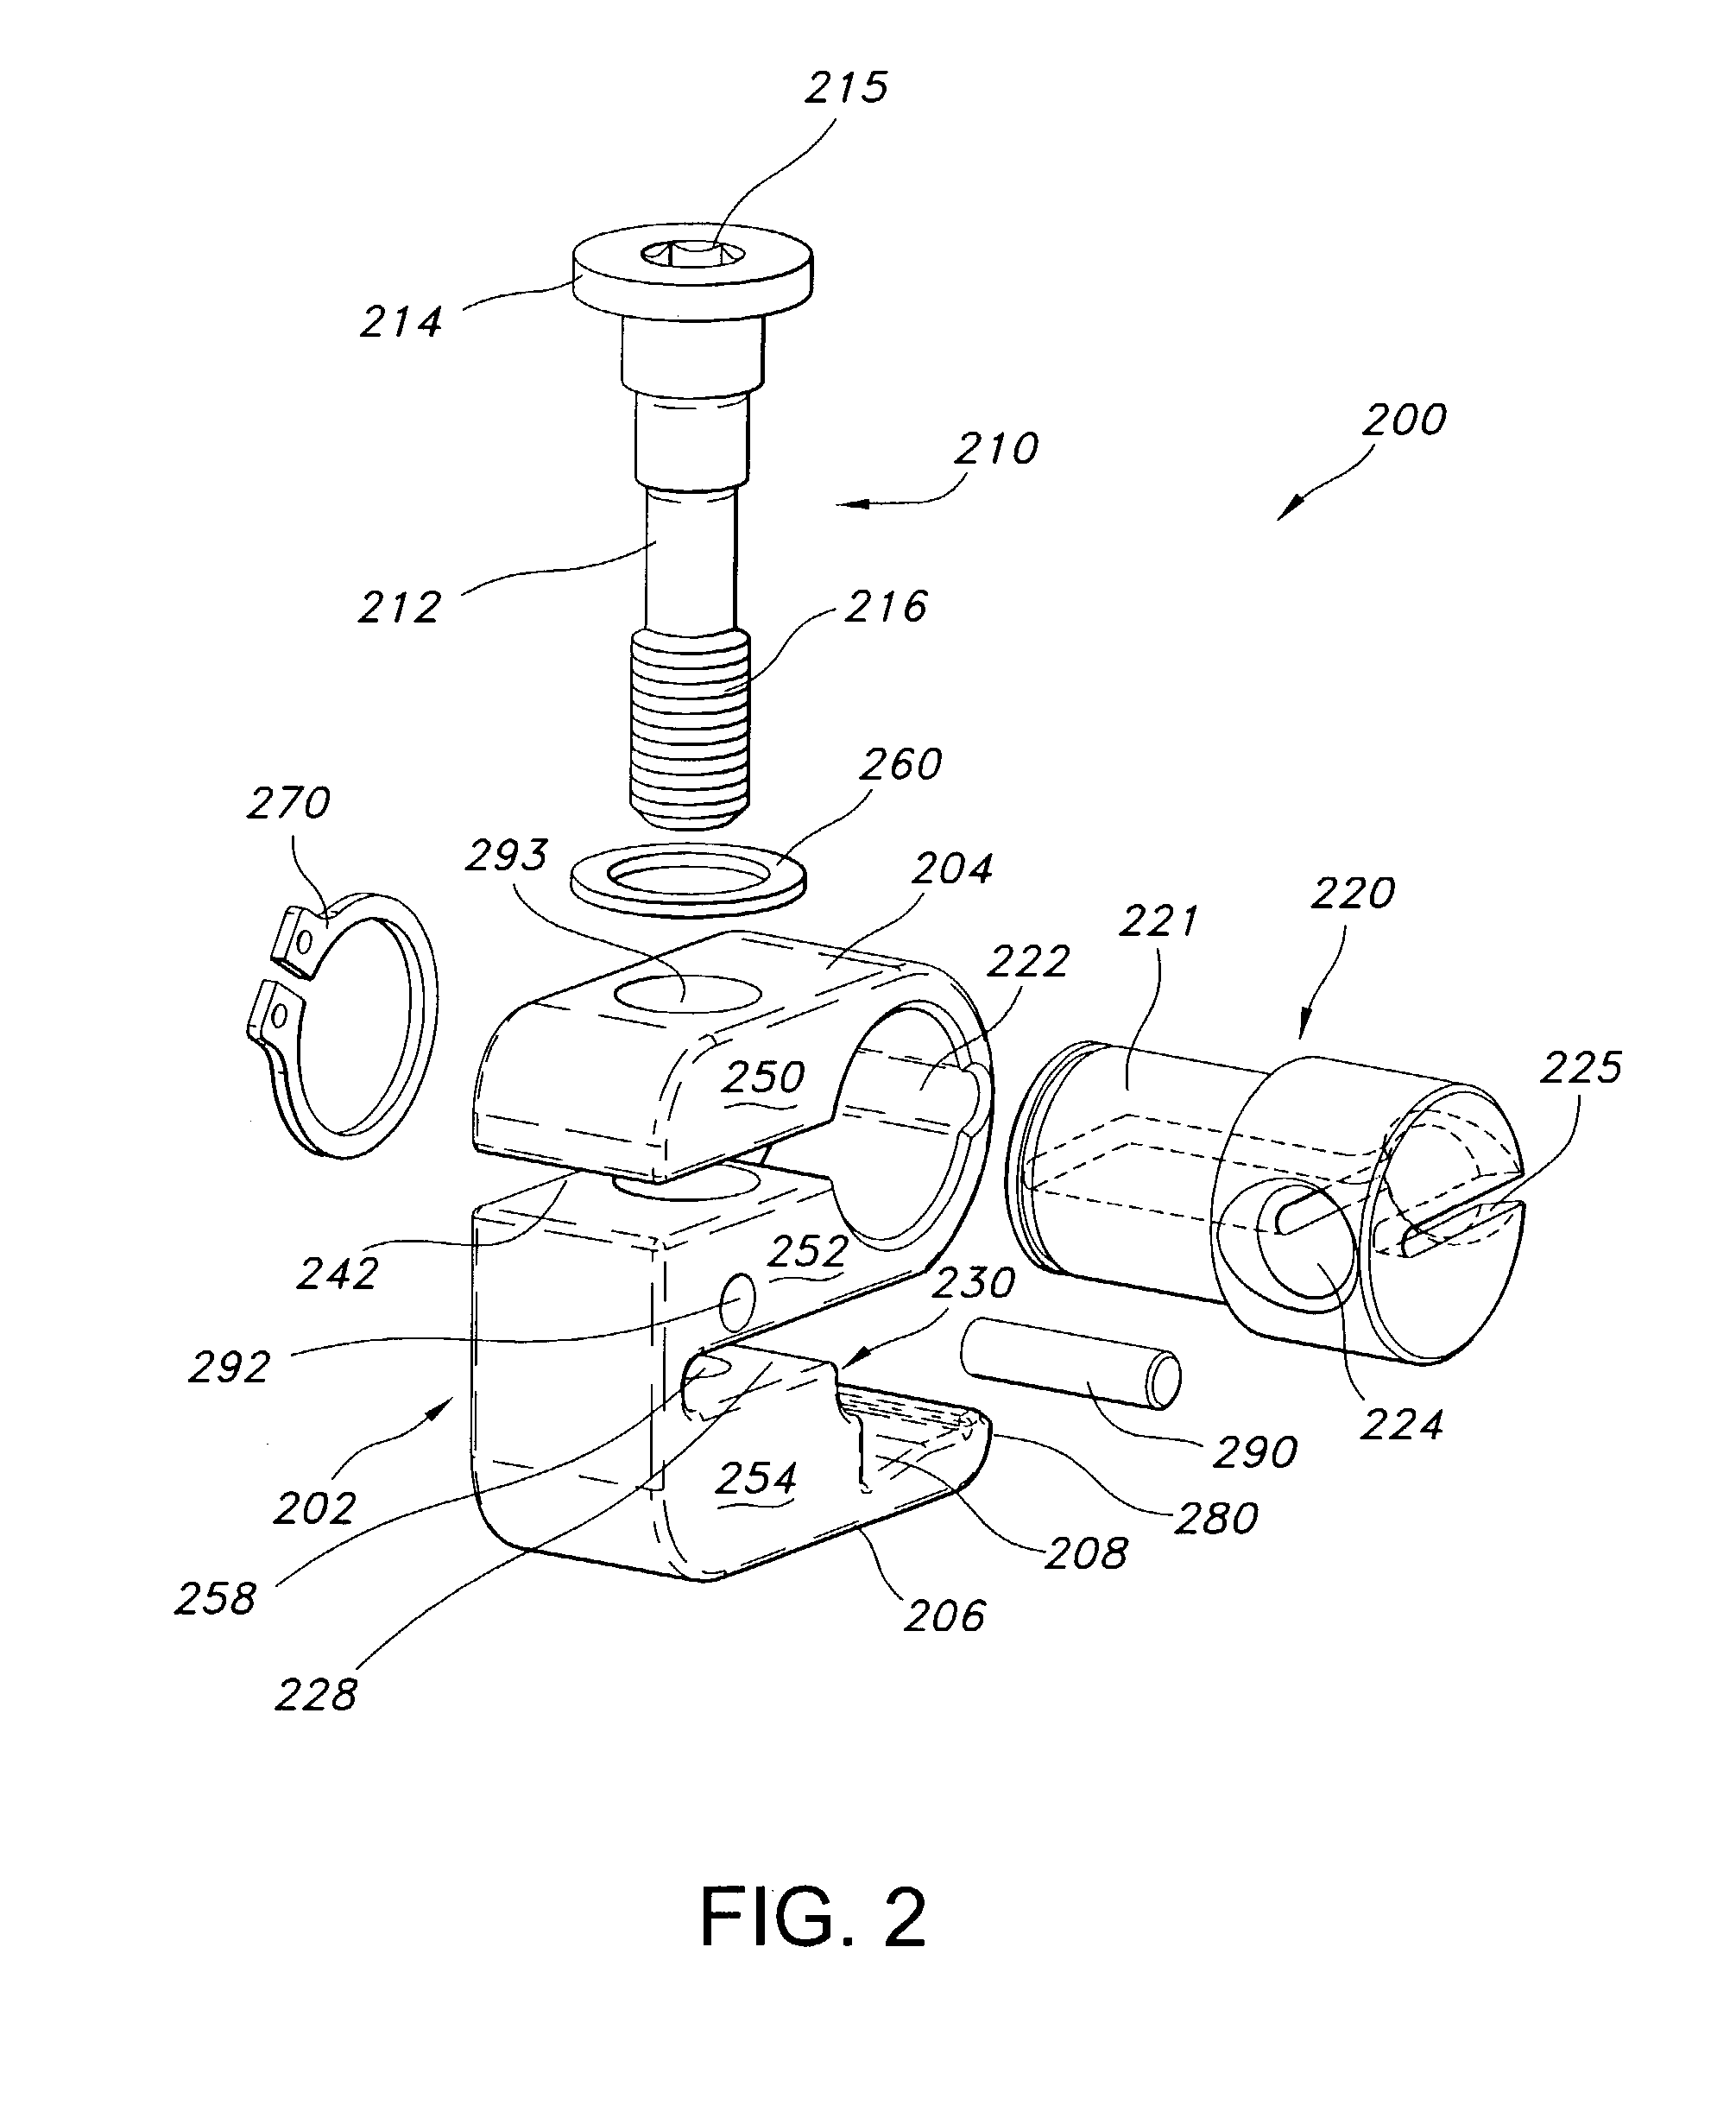 Clamping apparatus and methods